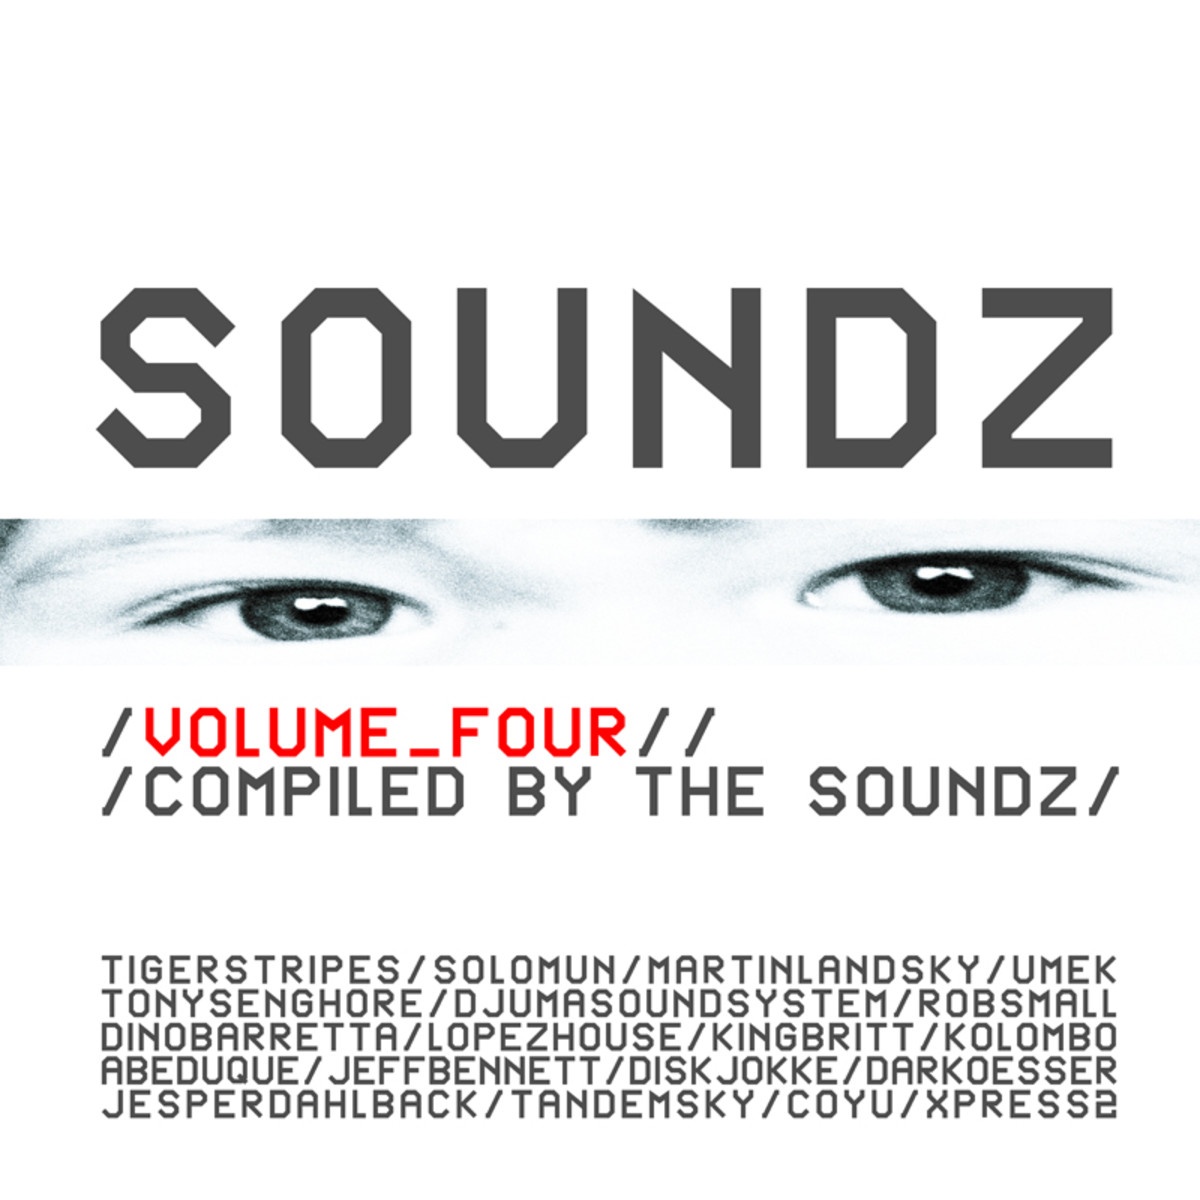 SOUNDZ VOL.4 (COMPILED BY THE SOUNDZ)